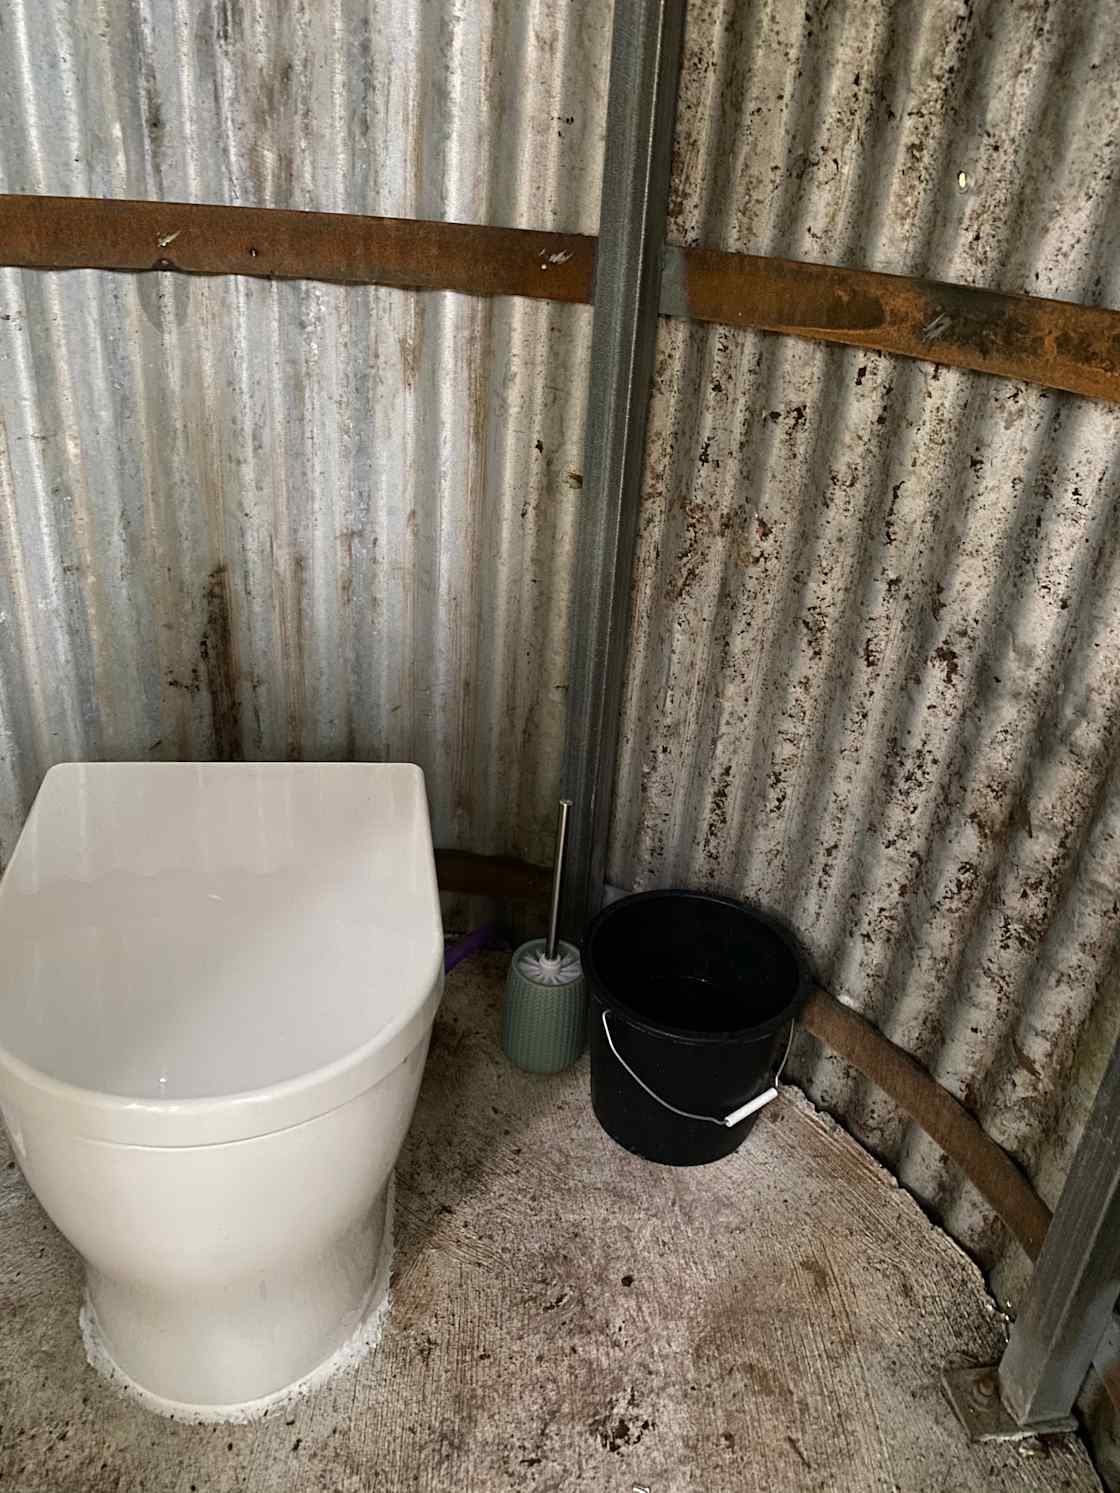 Toilet brush and a bucket of water if needed. As it’s a composting toilet there’s no flushing but sometimes cleaning is required! 